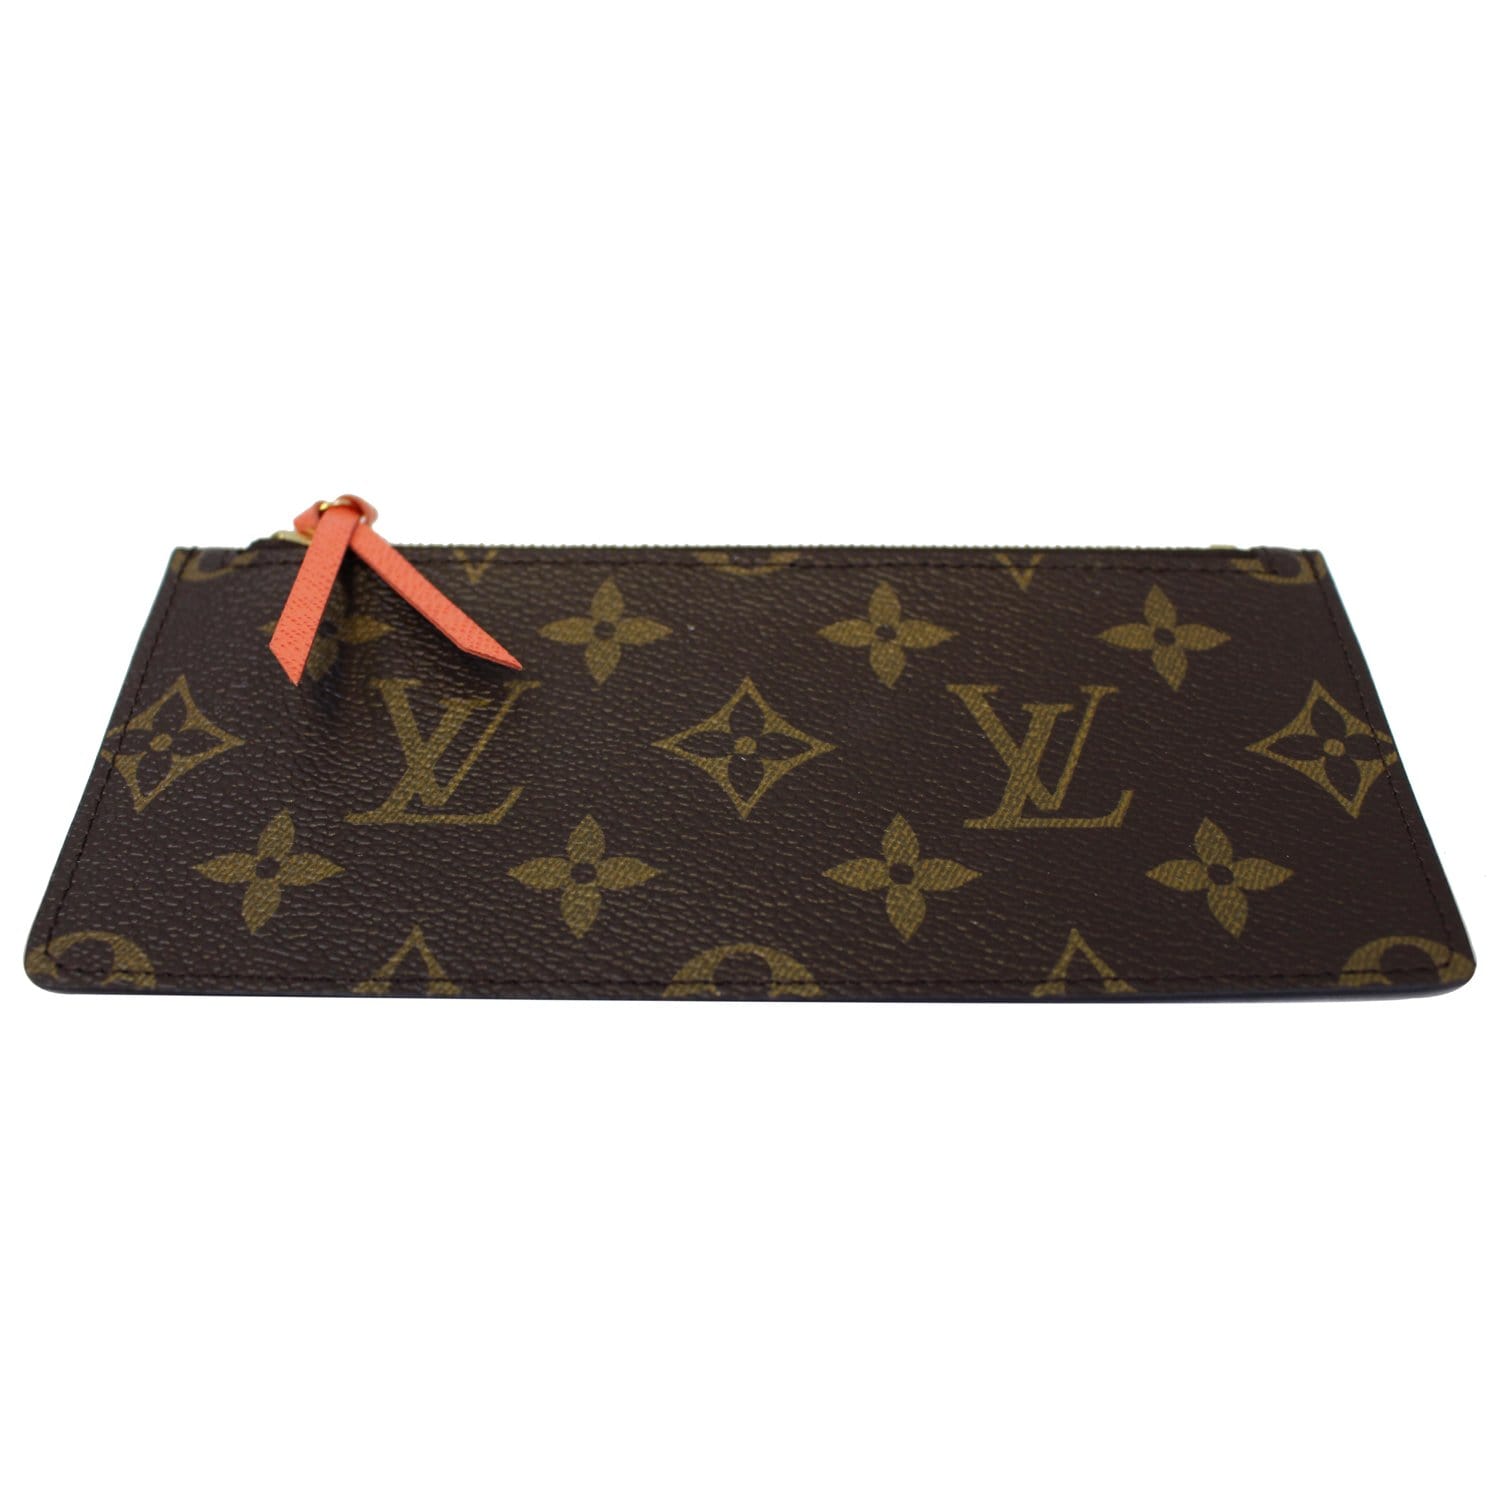 LV Felicie Pochette in Monogram Aurore Interior 8.3”x 4.7” Removable Chain  Strap, Two Removable Pouches/Wallets Comes with box DM for…